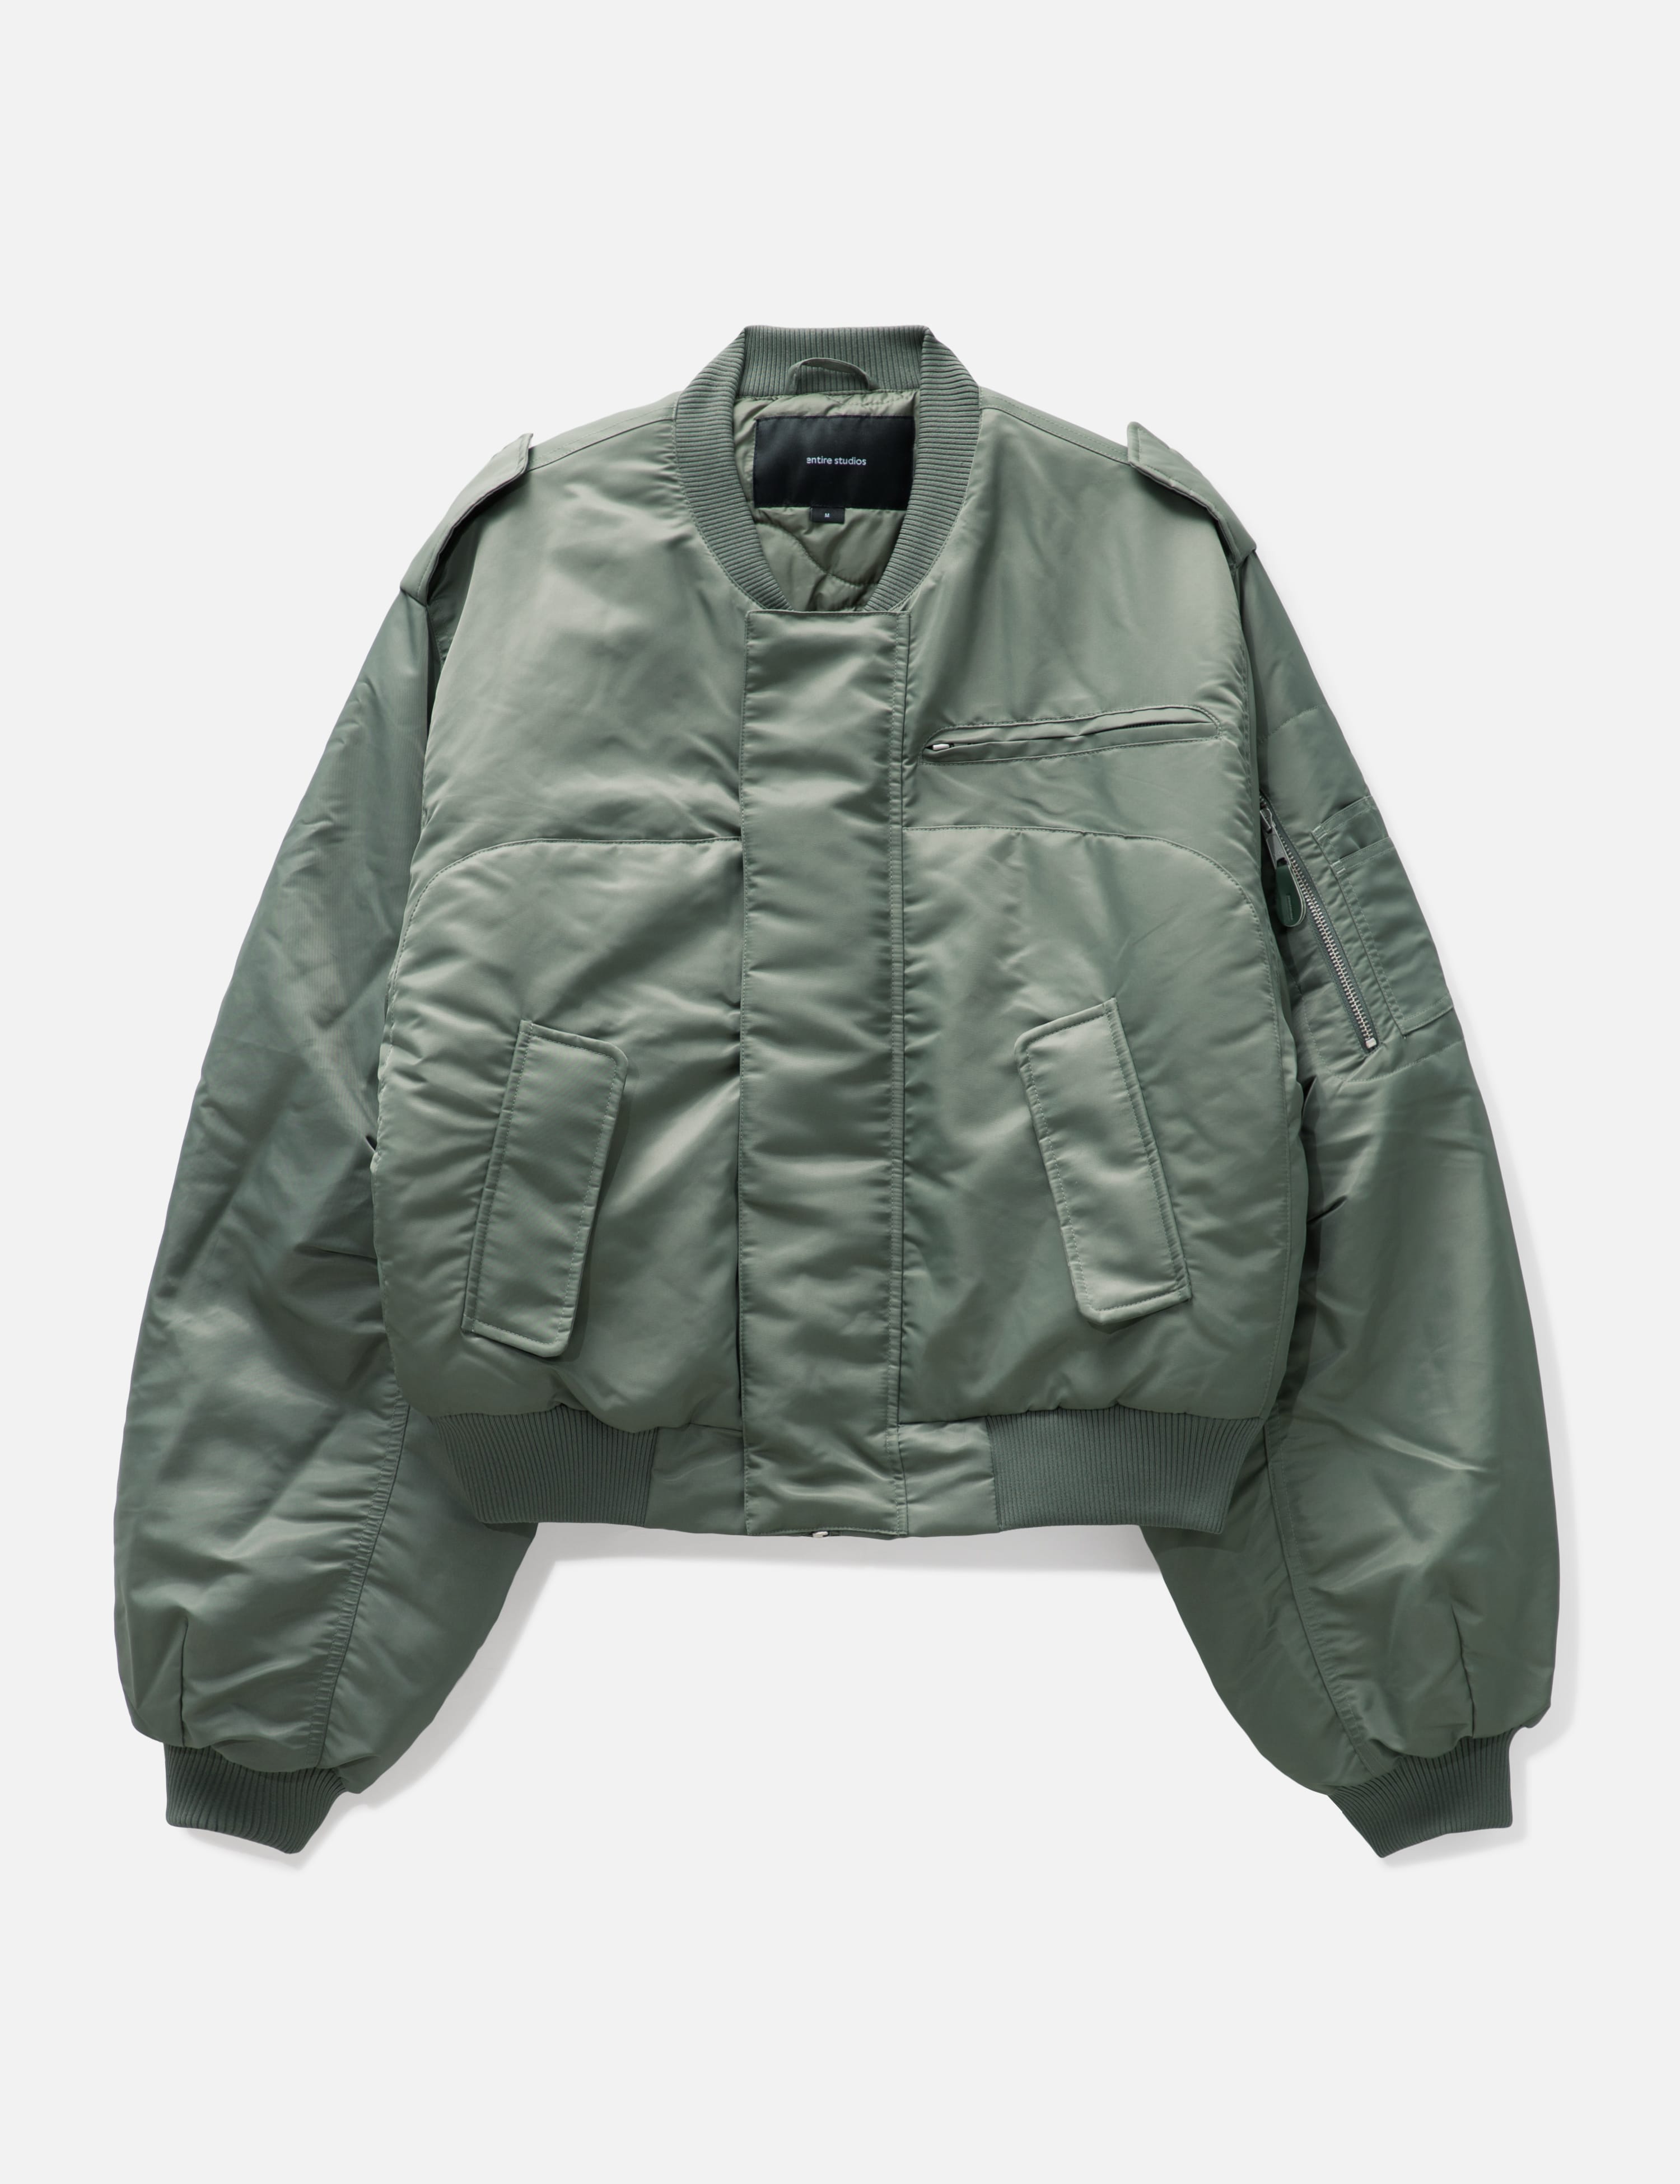 Jackets   HBX   Globally Curated Fashion and Lifestyle by Hypebeast